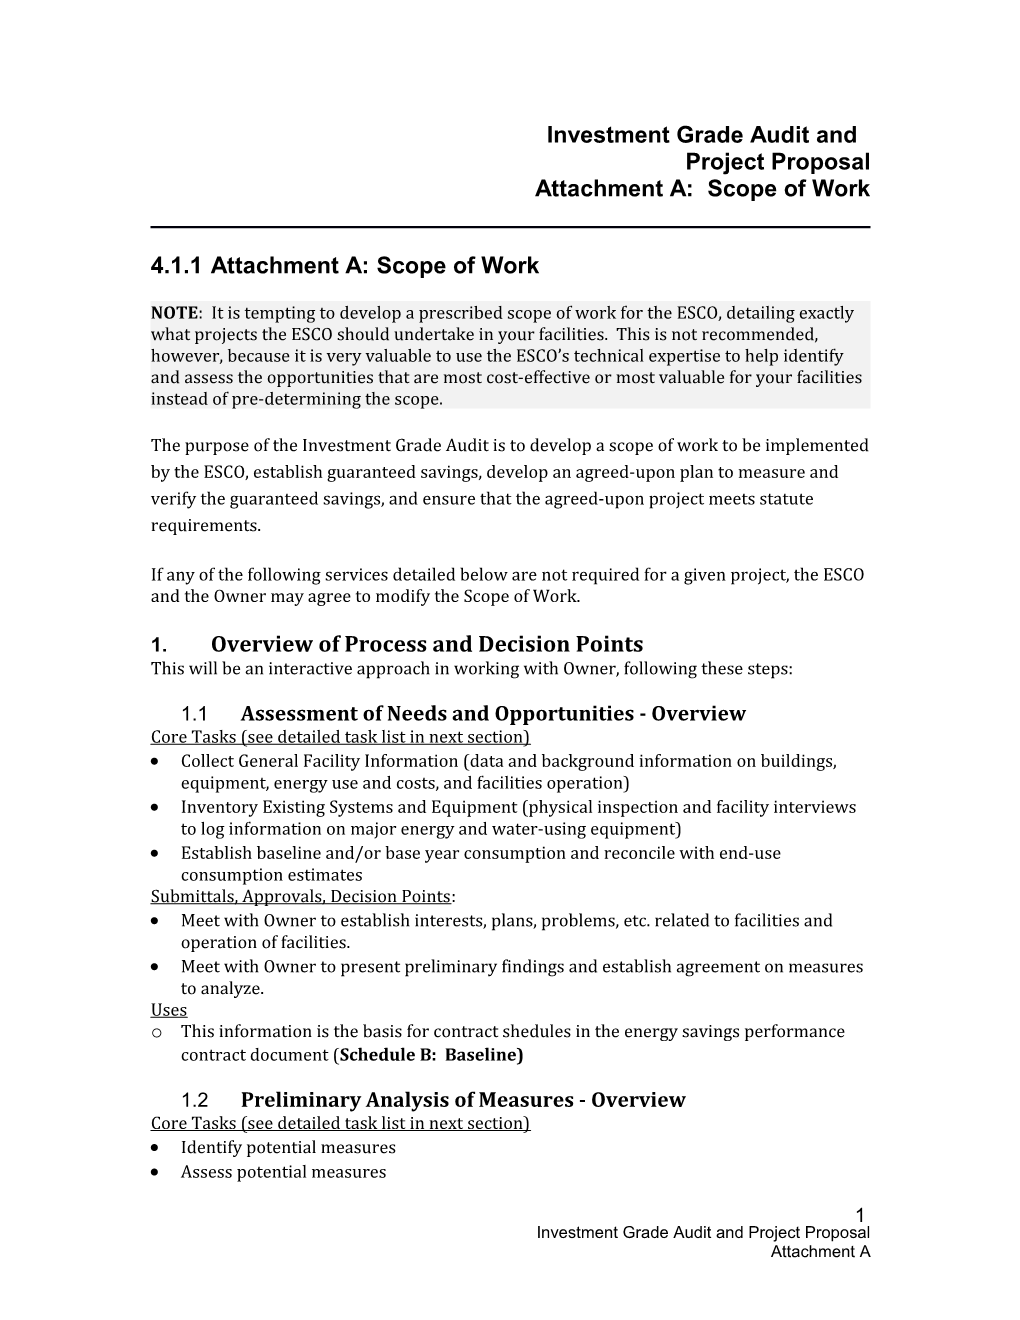 Investment Grade Audit and Project Proposal: Attachment A: Scope of Work